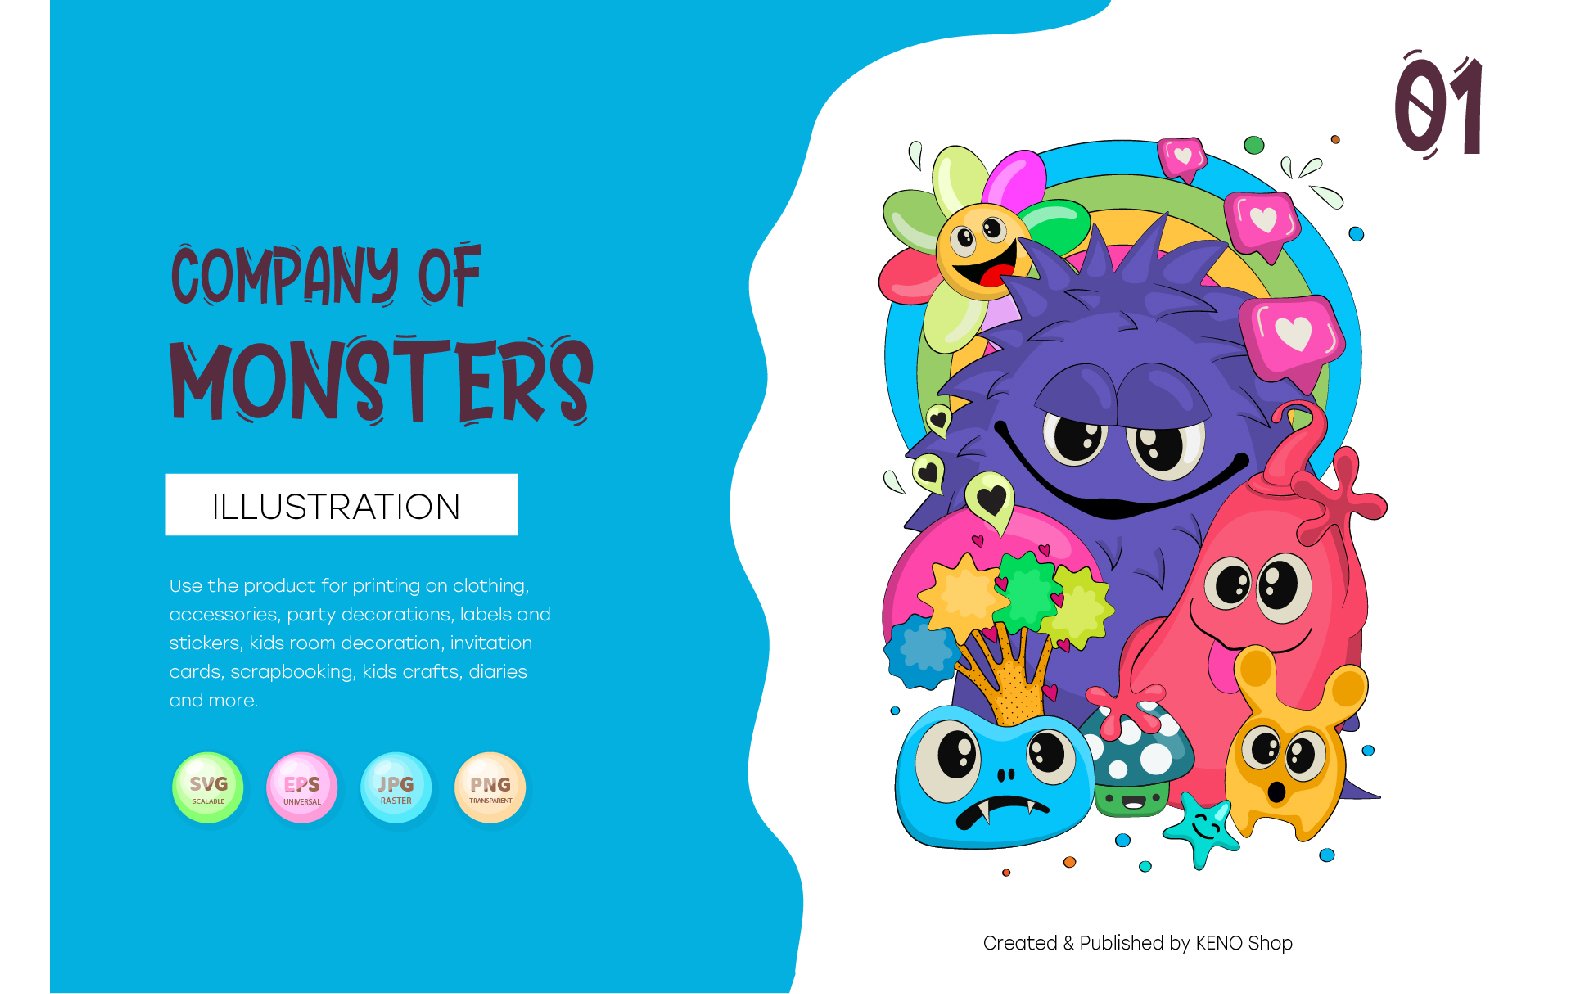 Cheerful company of monsters 01. T-Shirt, PNG, SVG.